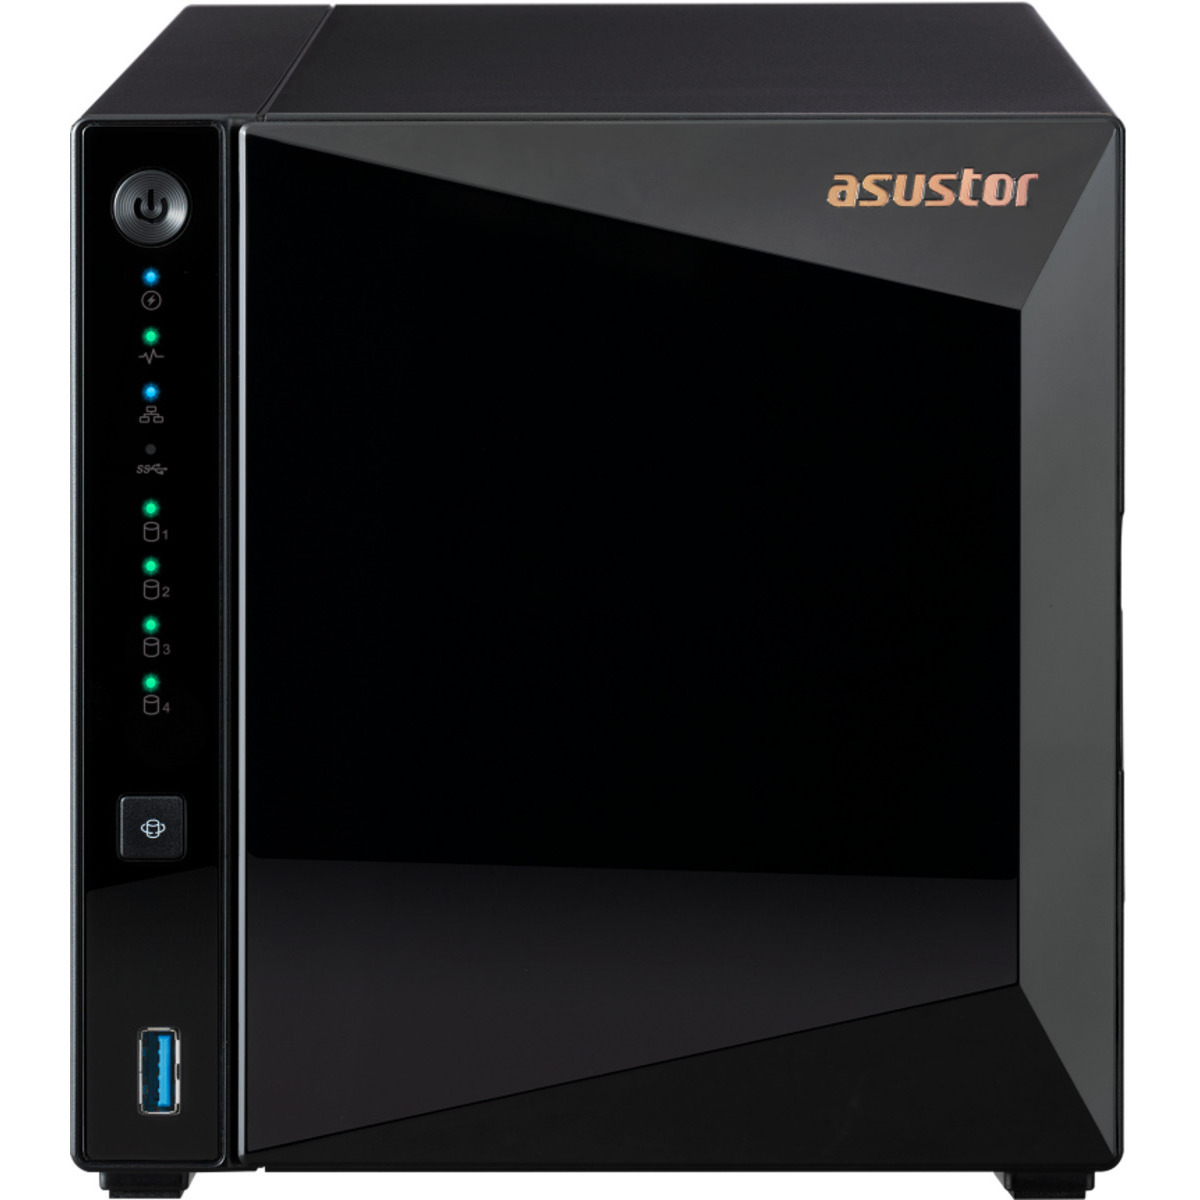 ASUSTOR DRIVESTOR 4 Pro Gen2 AS3304T v2 32tb 4-Bay Desktop Personal / Basic Home / Small Office NAS - Network Attached Storage Device 4x8tb Seagate IronWolf Pro ST8000NT001 3.5 7200rpm SATA 6Gb/s HDD NAS Class Drives Installed - Burn-In Tested - ON SALE DRIVESTOR 4 Pro Gen2 AS3304T v2